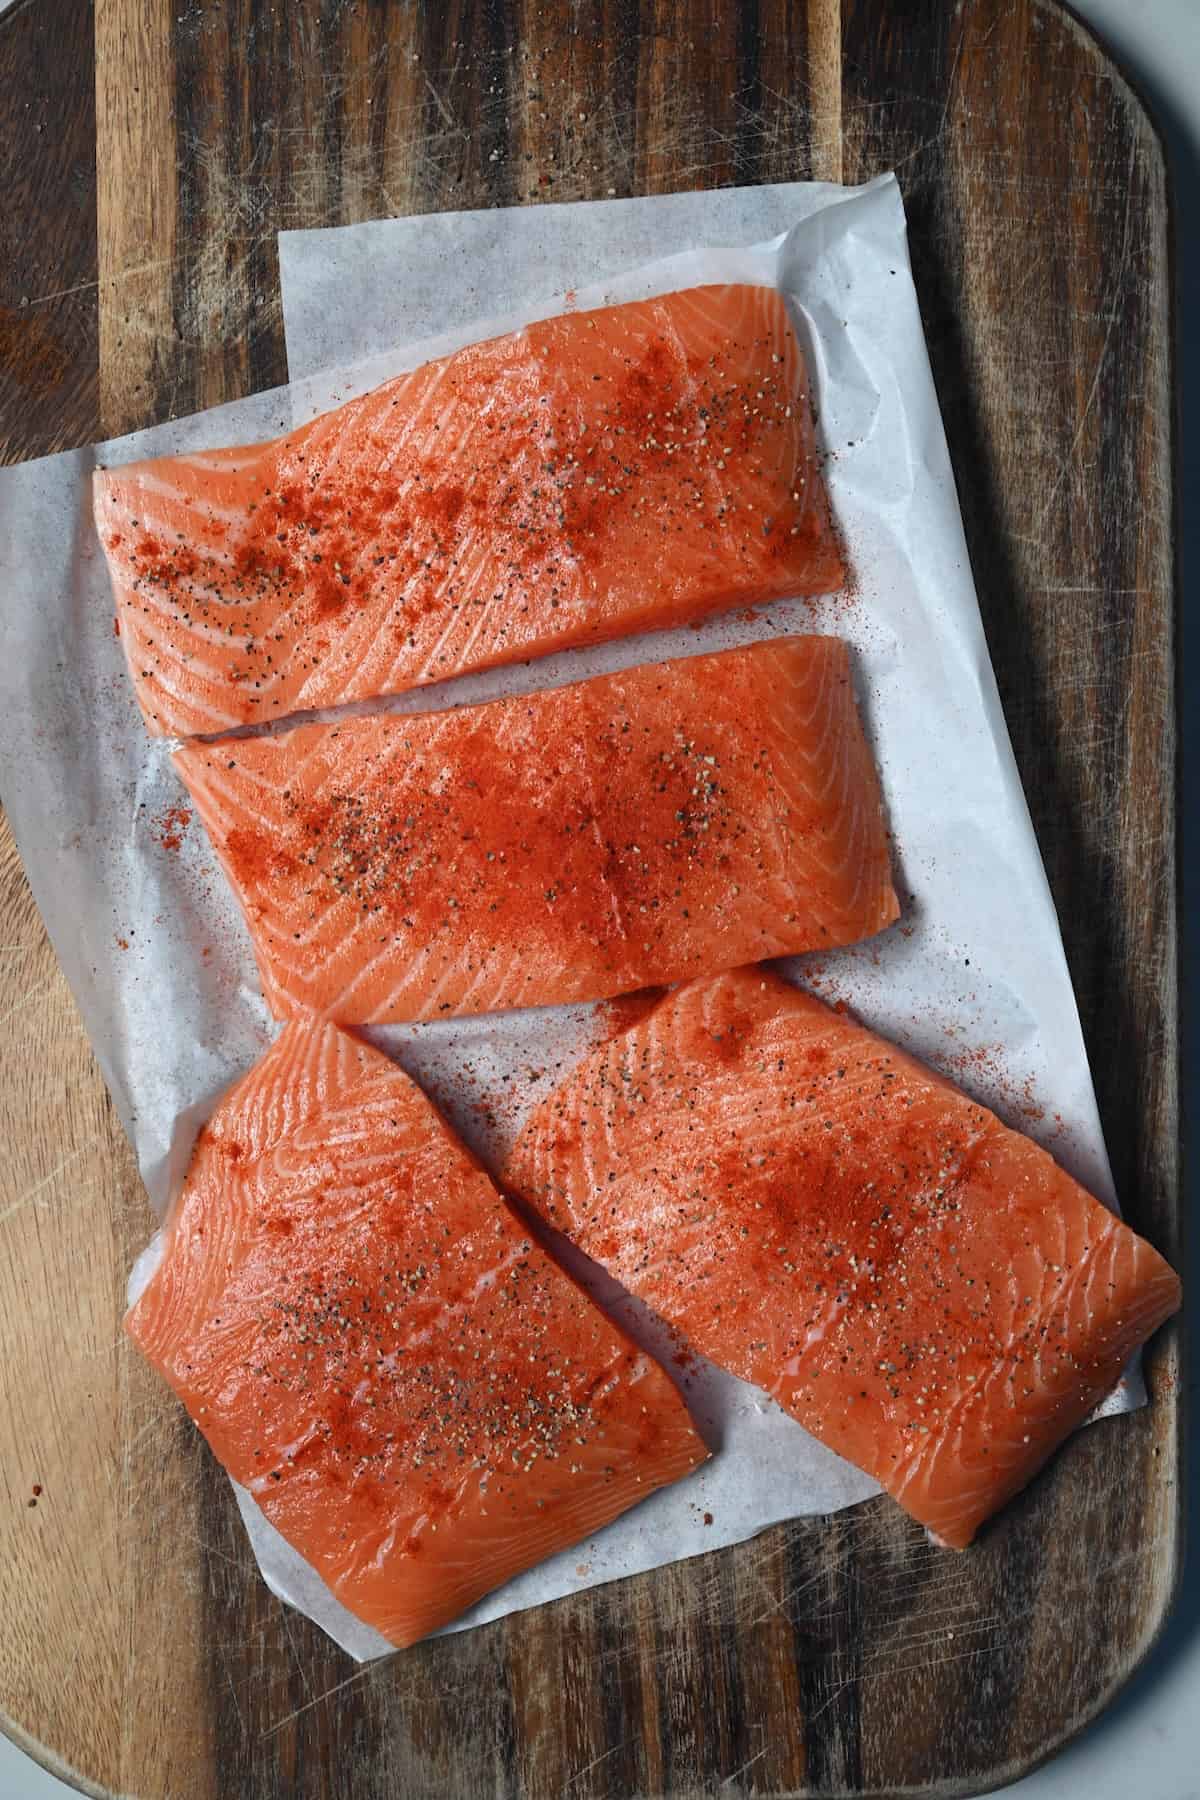 Salmon fitets seasoned with spices